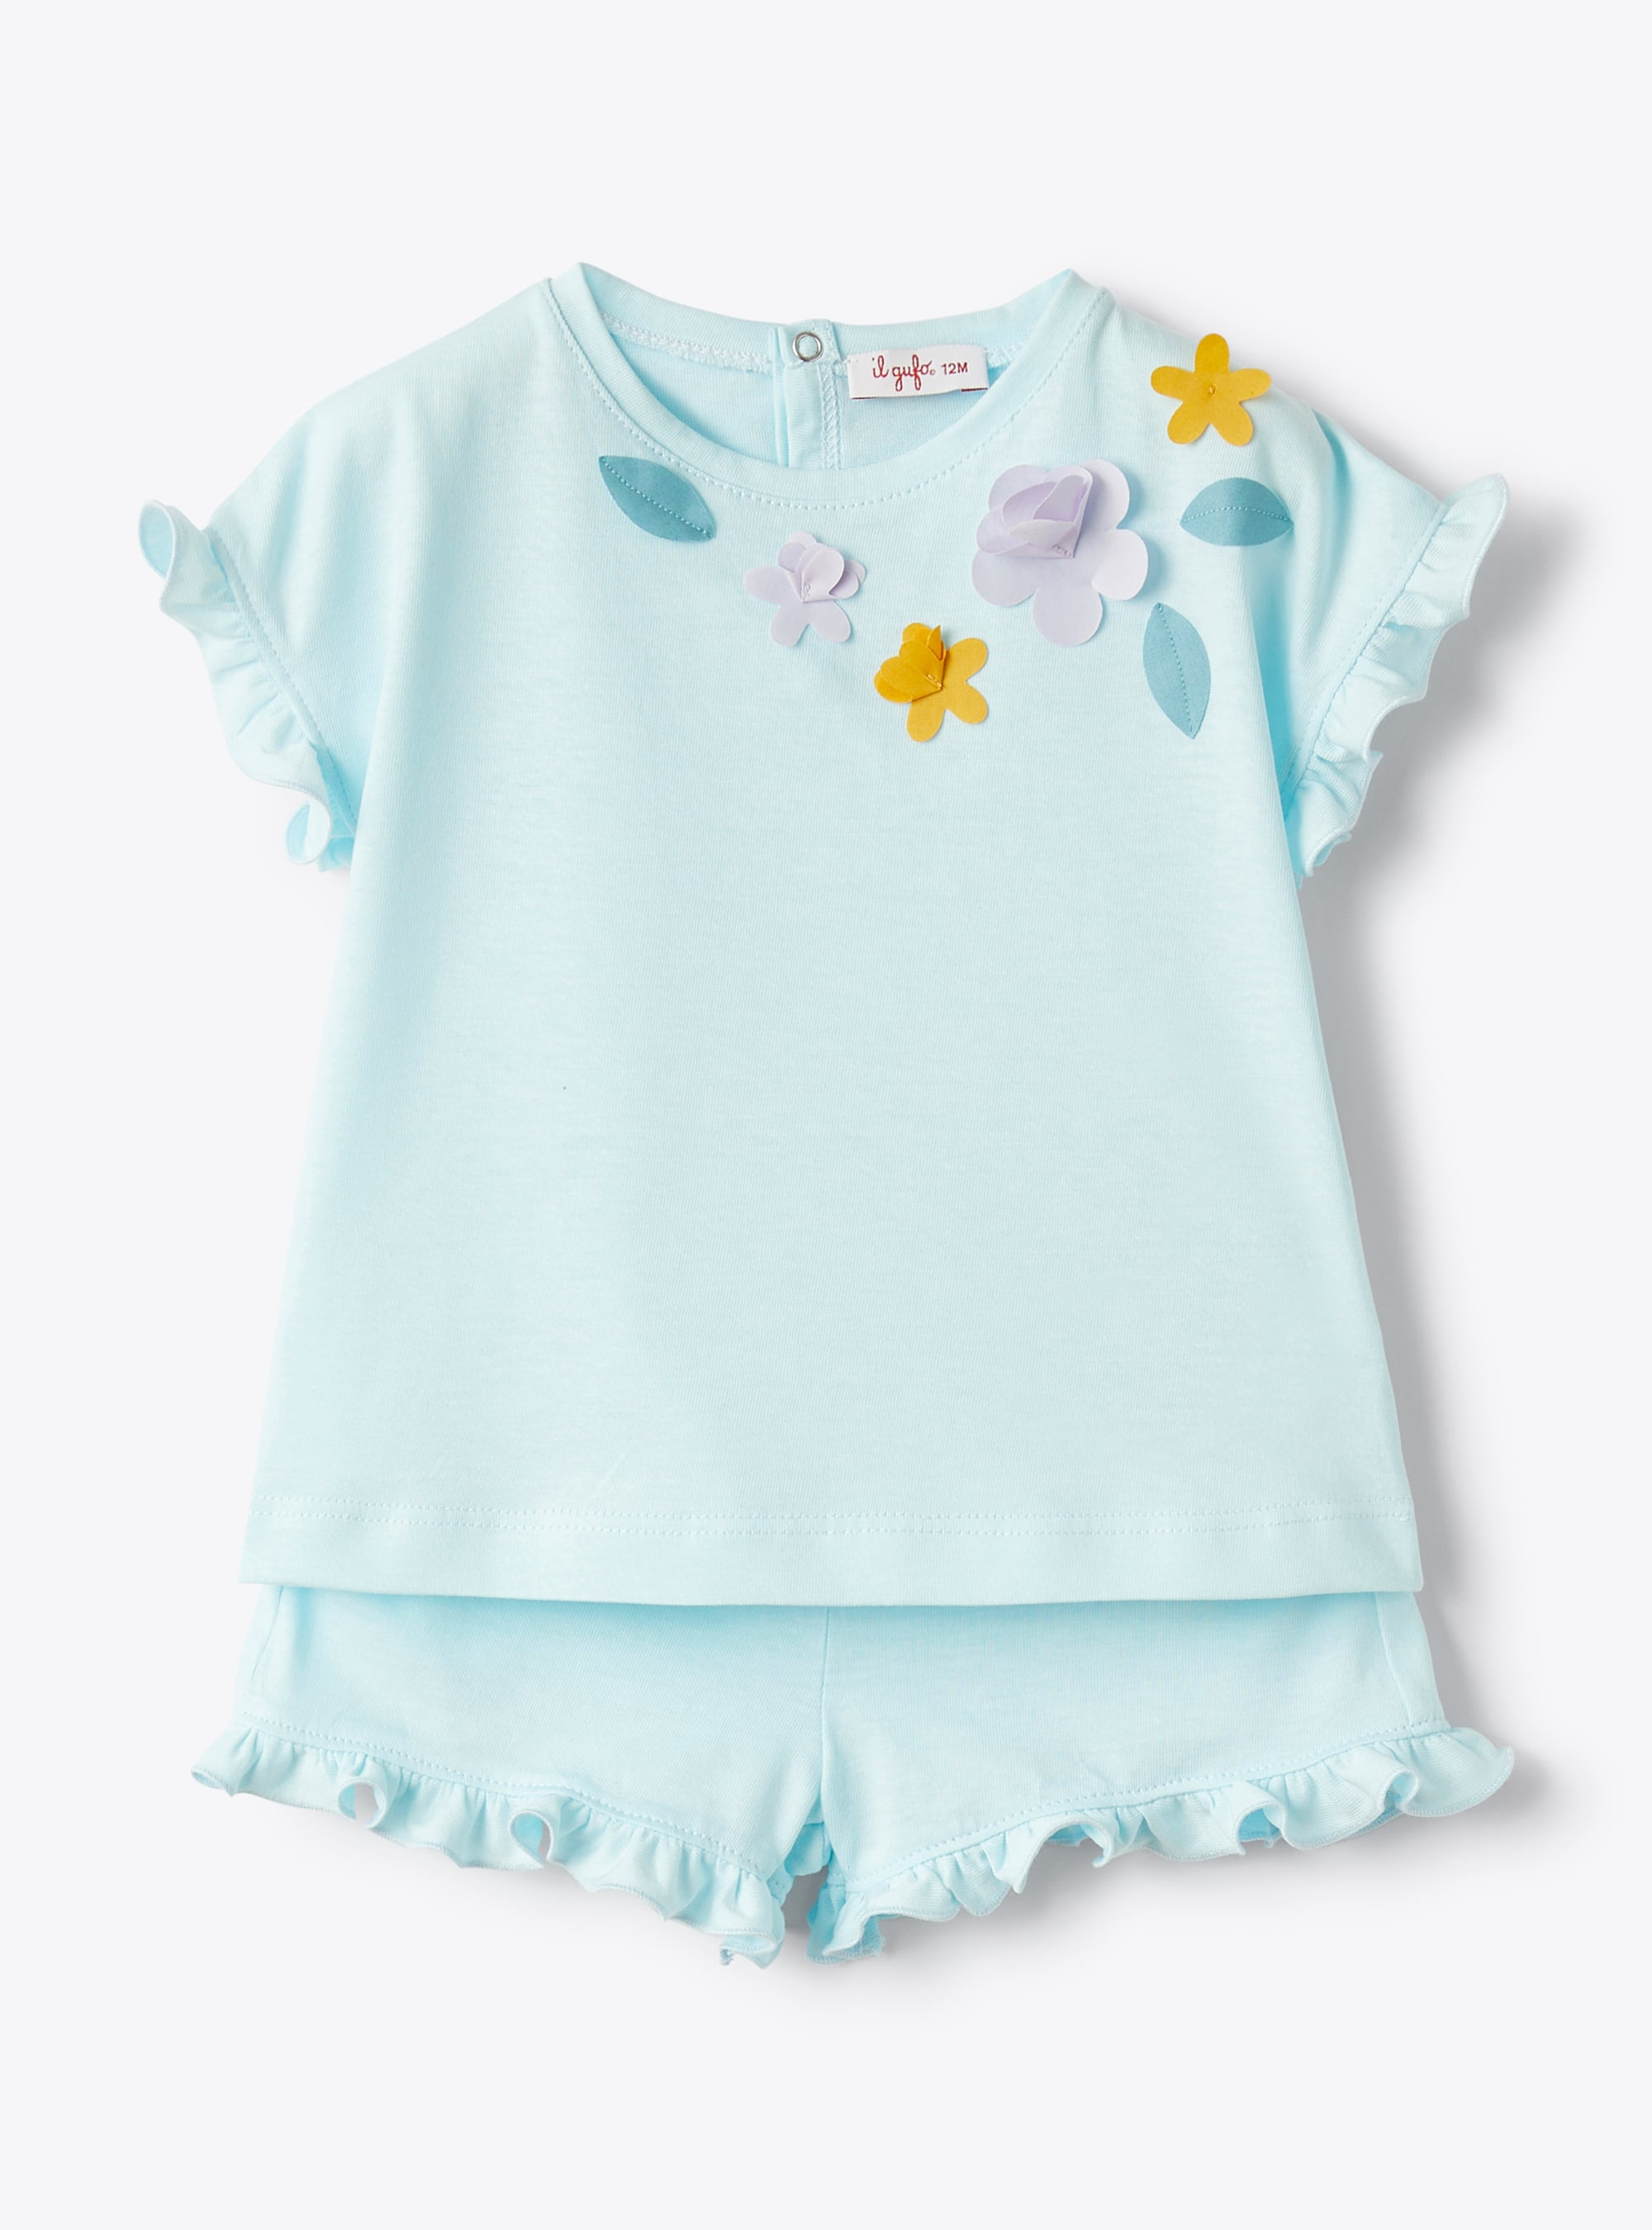 Two-piece set for baby girls in jersey with appliquéd flowers - COMPLETO DUE PEZZI - Il Gufo